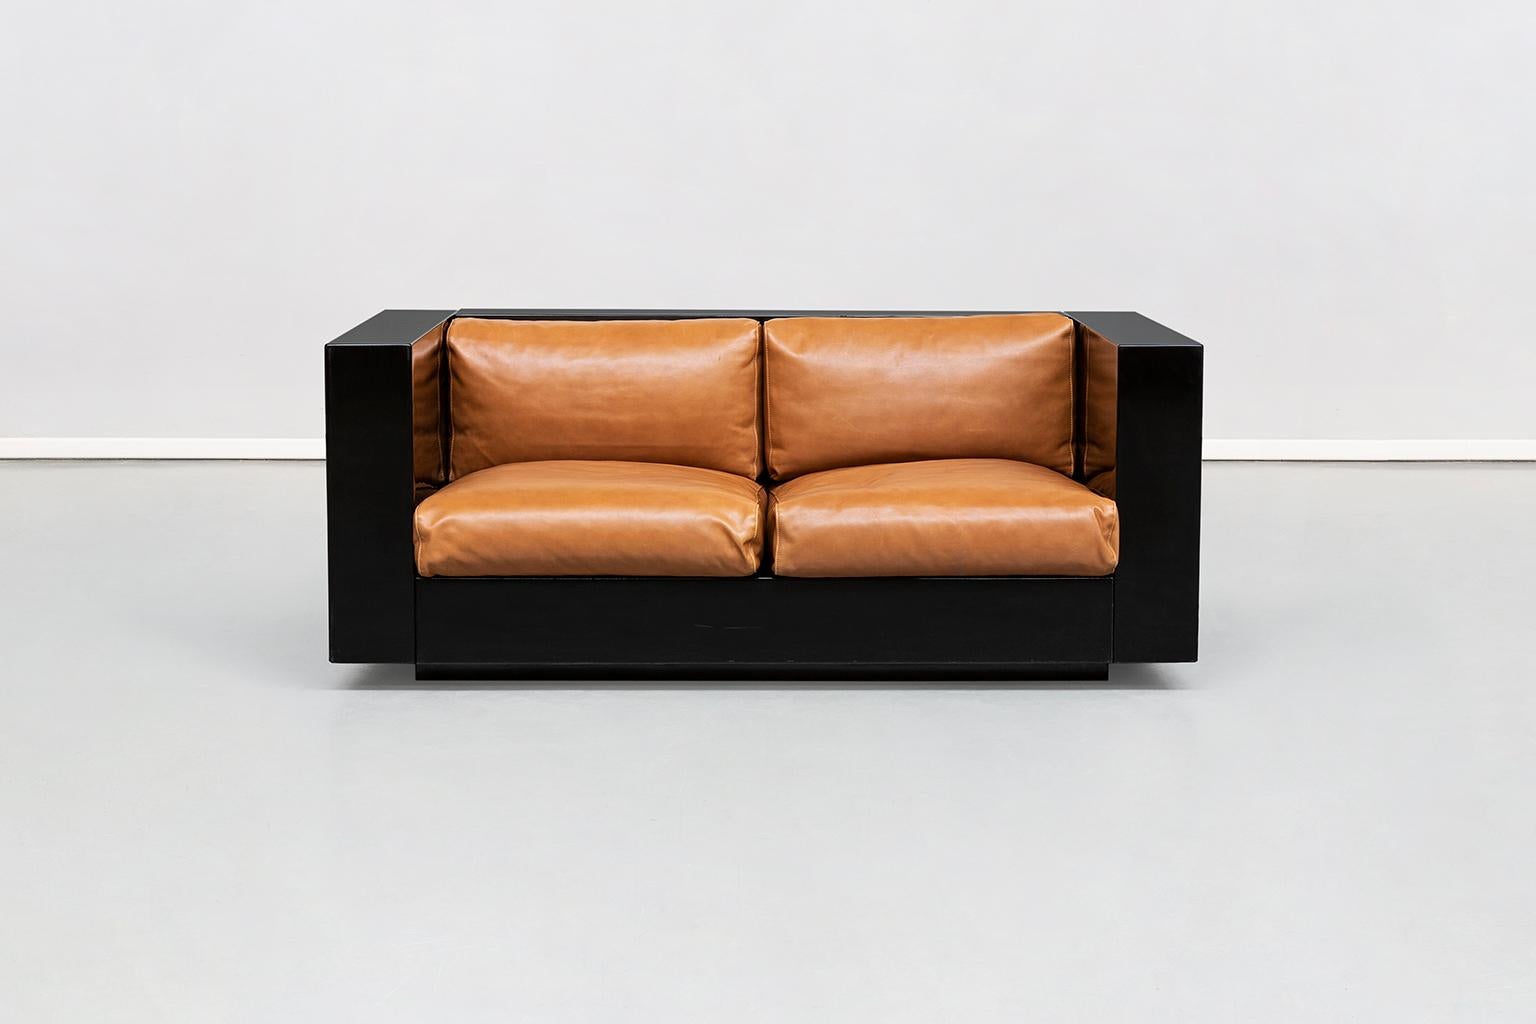 Italian two-seat Saratoga sofa, by Vignelli associates for Poltronova, 1964
Two-seat sofa with rigid structure, made by assembling four elements of equal thickness, with rounded corners, houses slightly protruding seat cushions. The desired purity